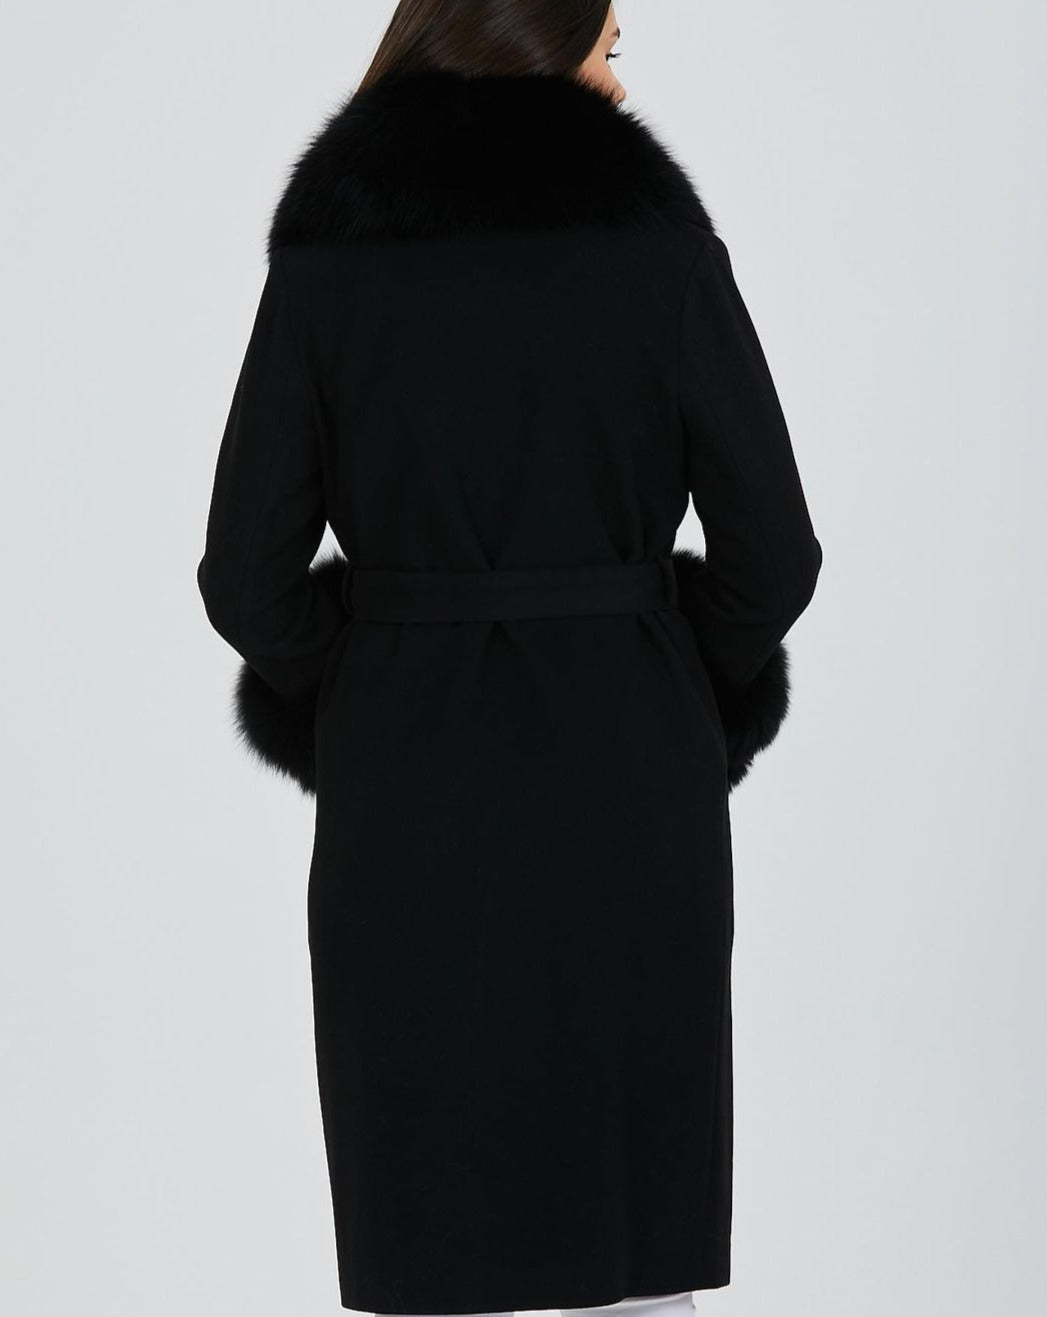 Back of Elegant GLORIA BLACK Coat with Luxurious Fox Fur Collar and Cuffs